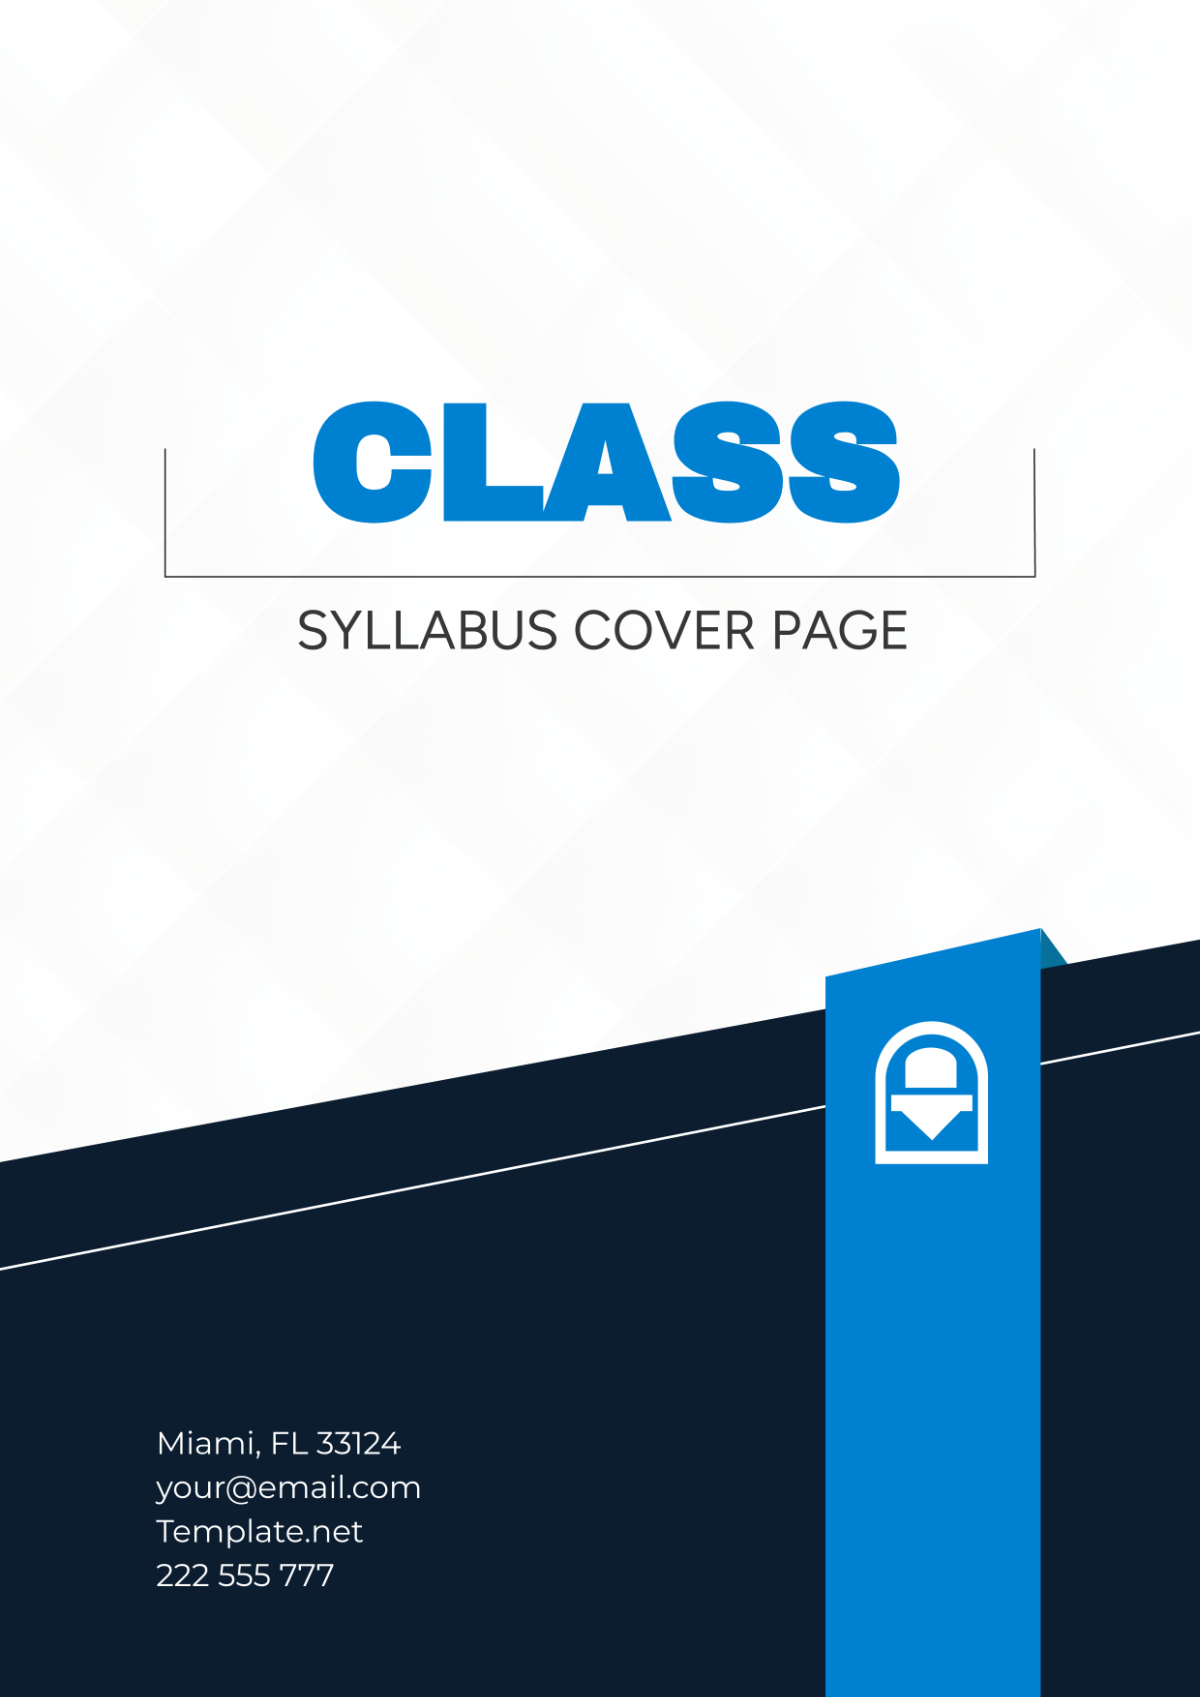 Class Syllabus Cover Page